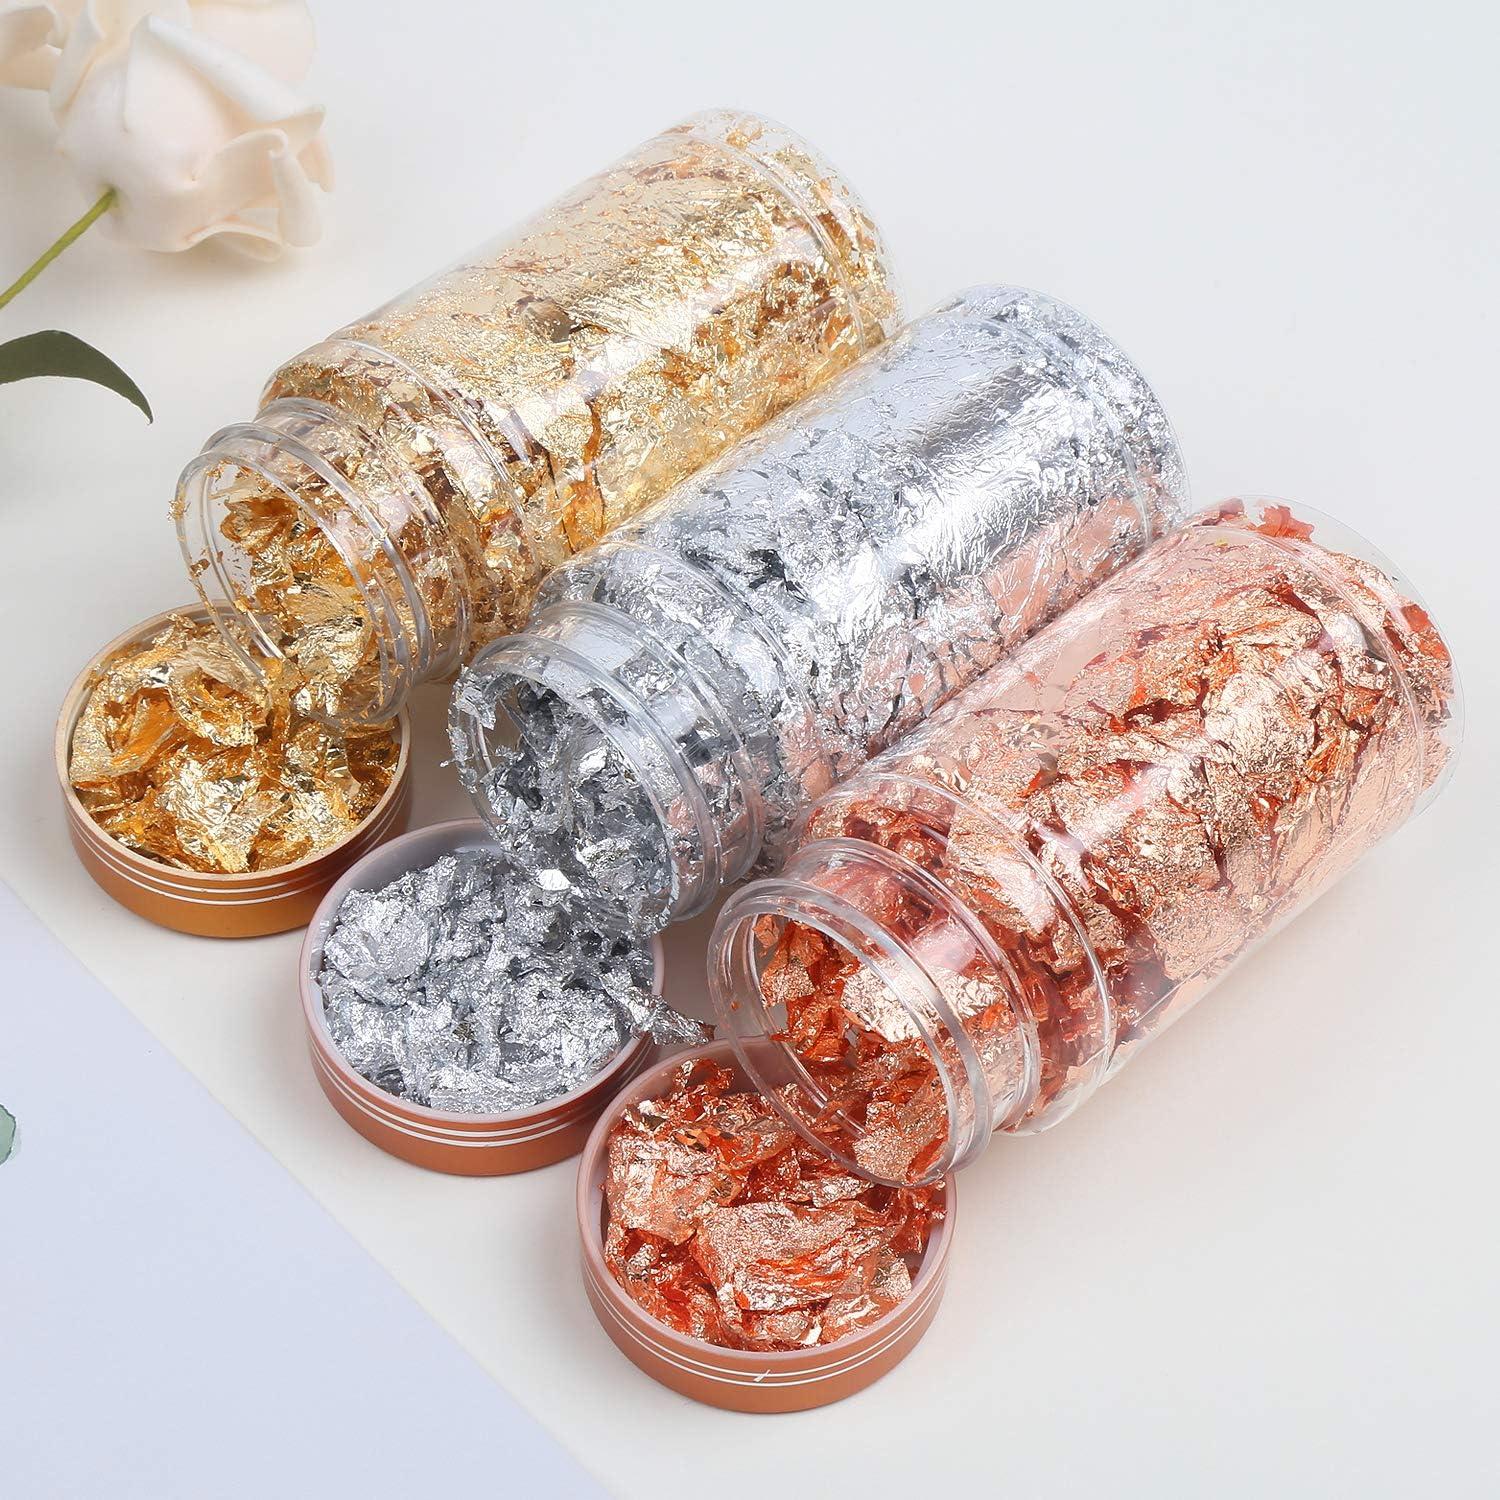  Glitter Gold Flakes,Gilding Flakes Leaf Silver Rose Gold Foil  for DIY Resin Jewelry Soap Making,Painting,Crafts,Nail Art  Decoration,Slime,Cosmetic Lip Gloss - 3 Packs Gold+Silver+Copper Foils,2  Grams : Arts, Crafts & Sewing